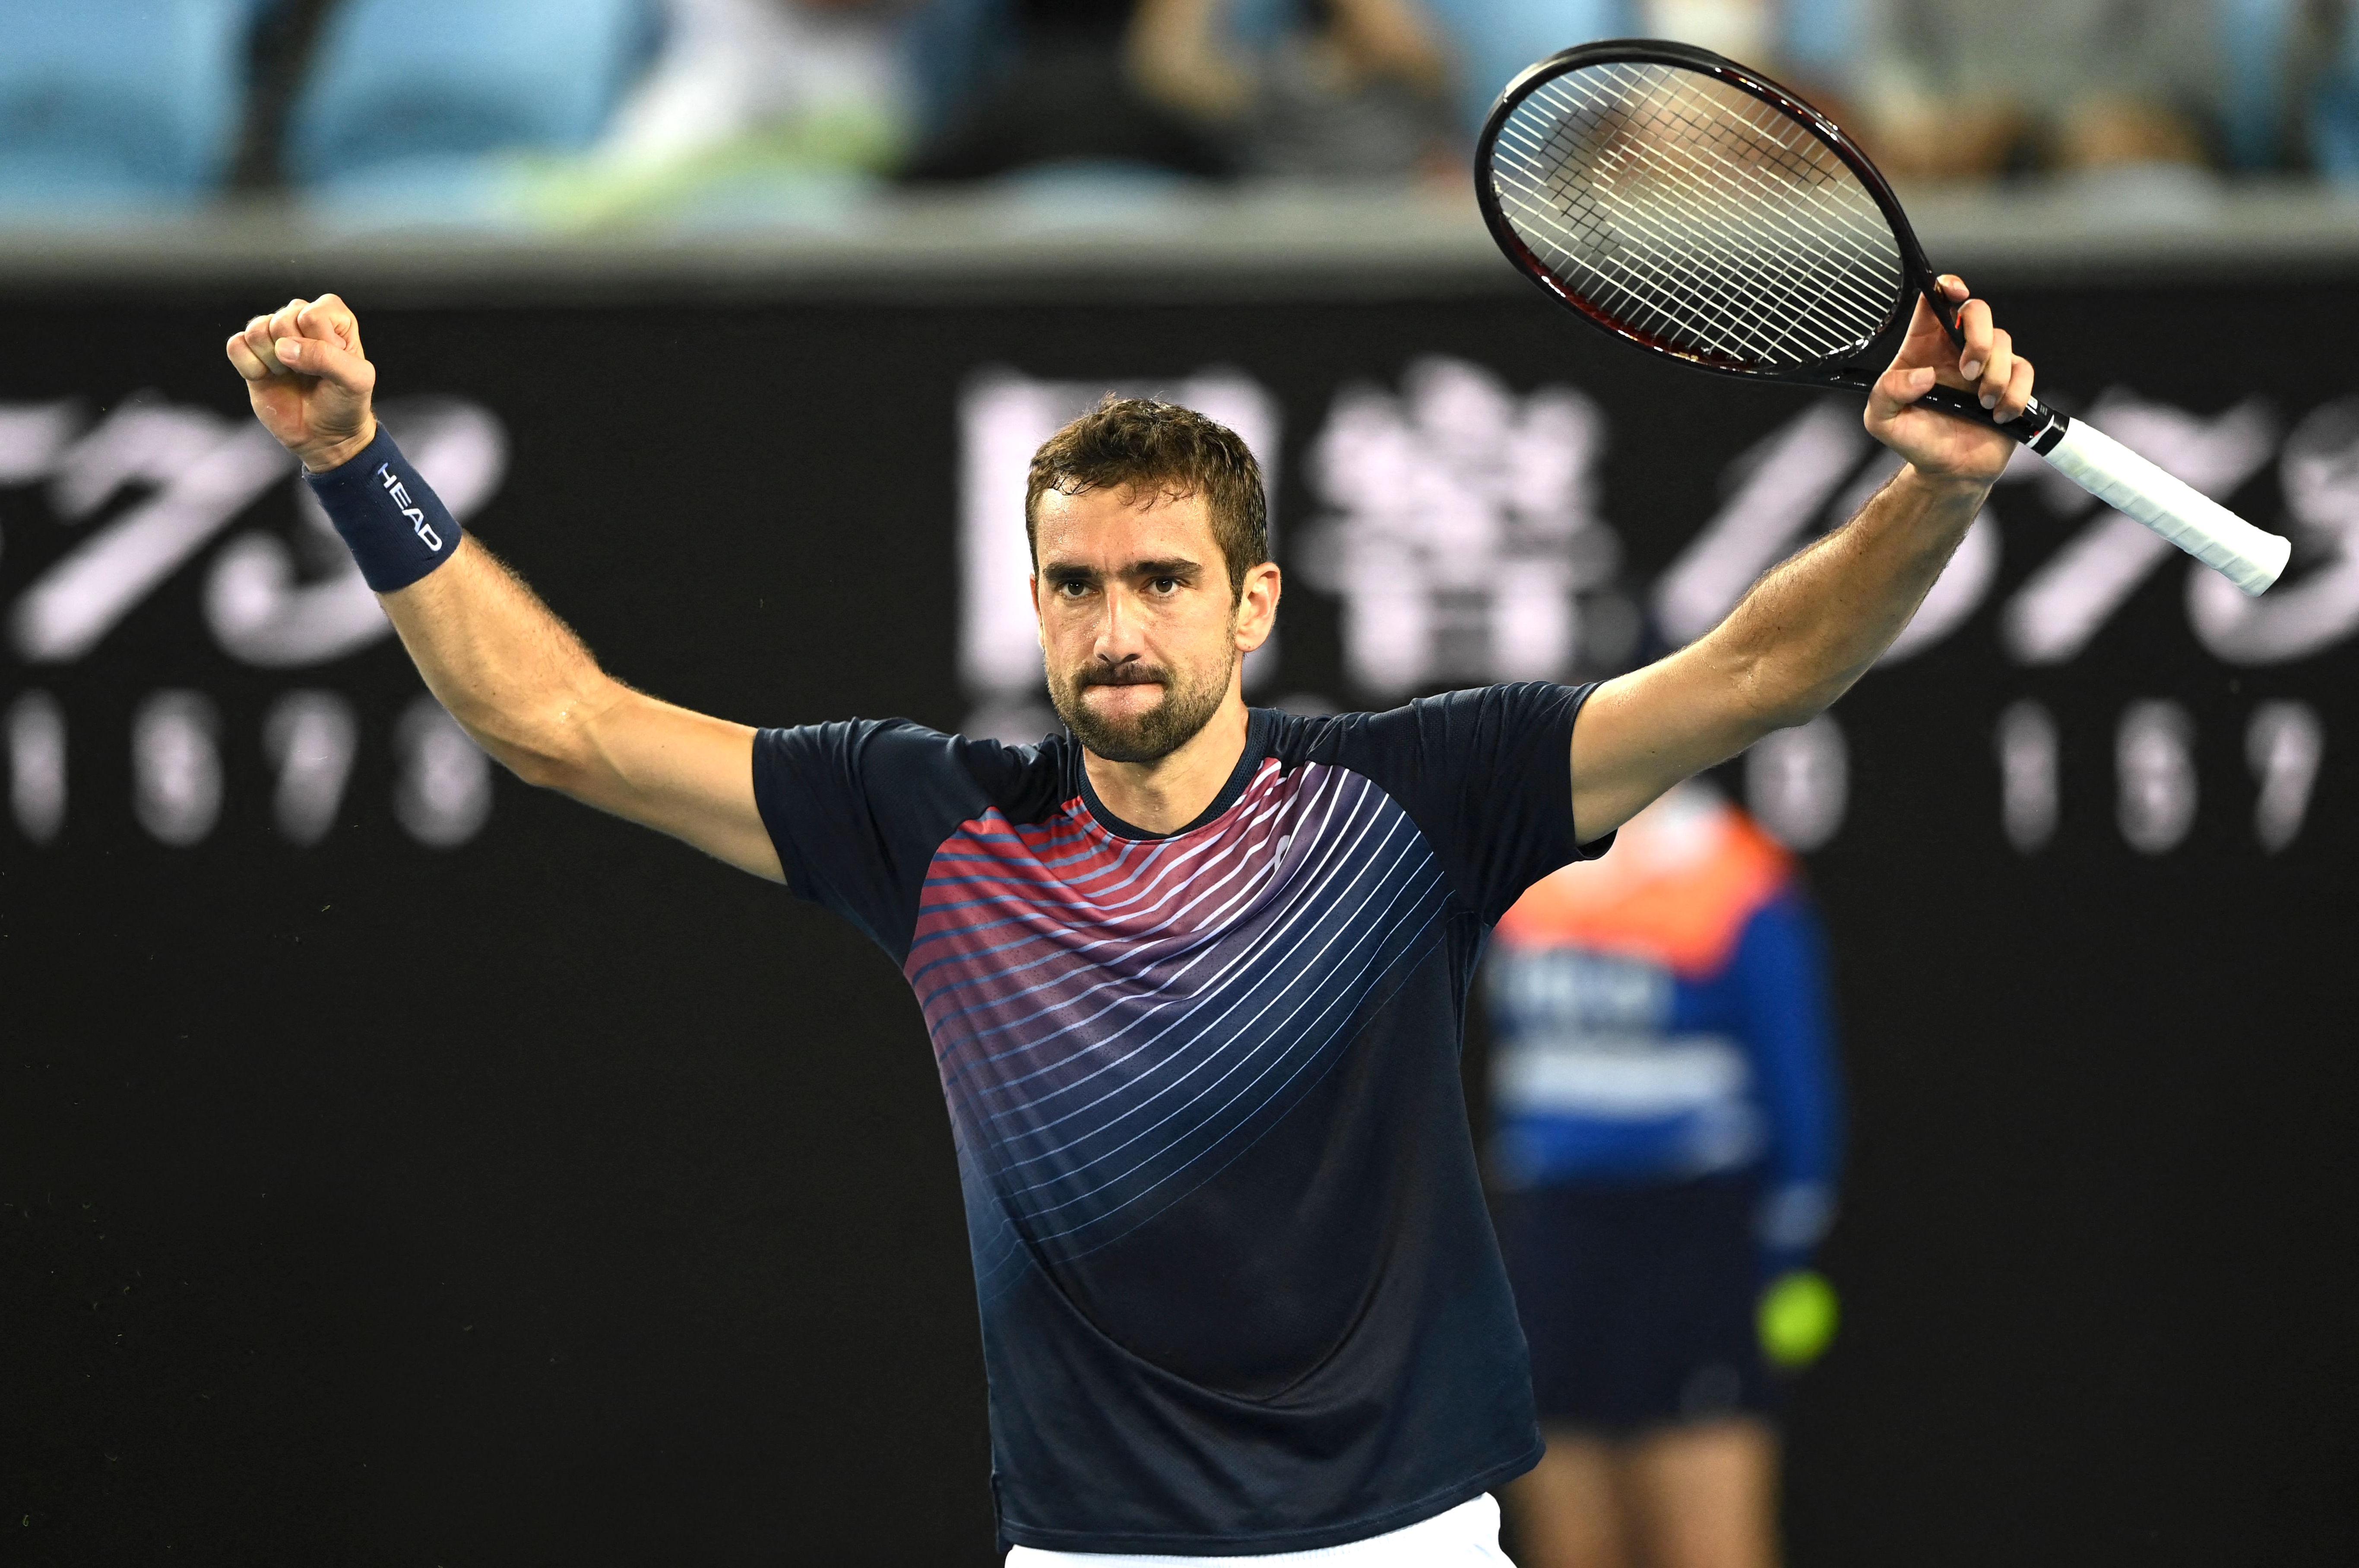 Stat of the Day Marin Cilic reaches second week of a Grand Slam for 25th time